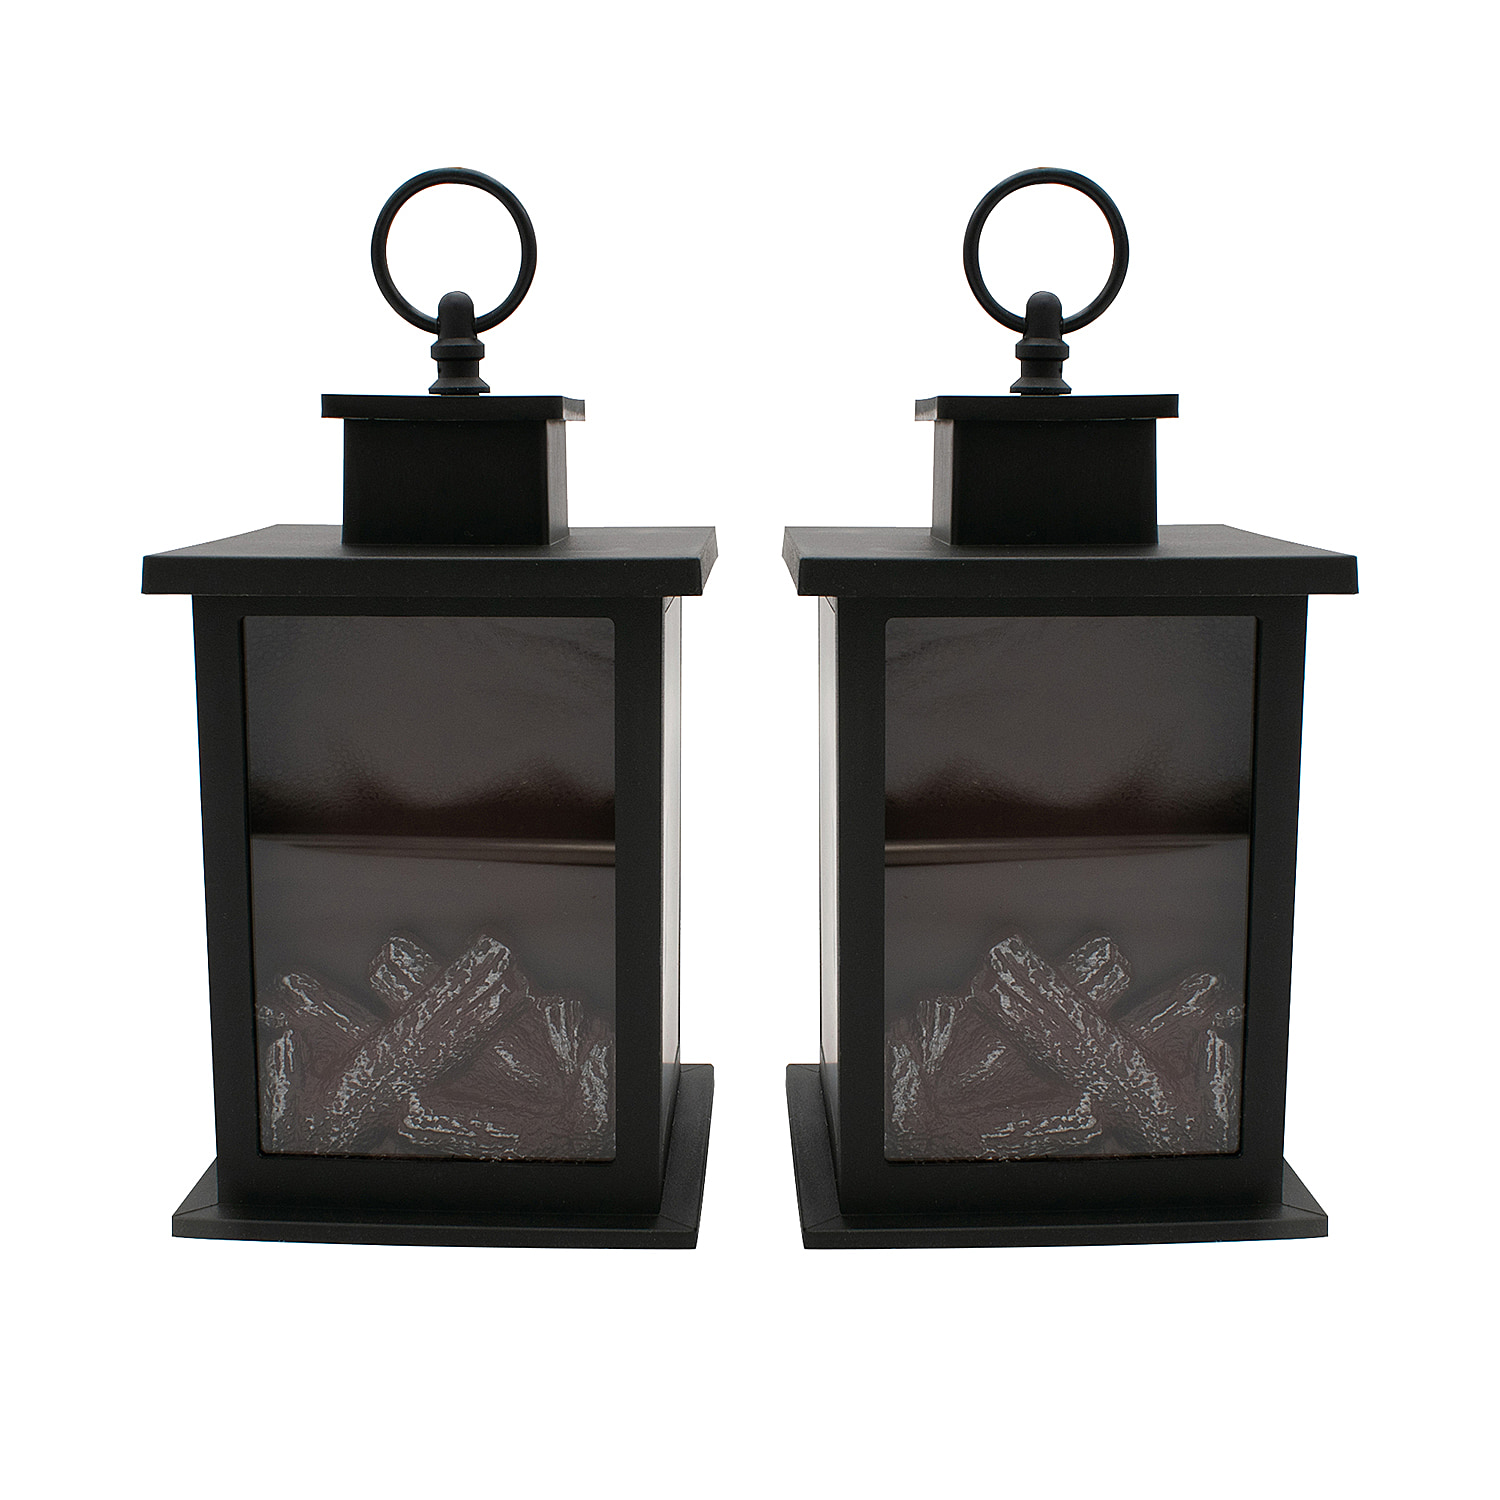 Set-of-Fireplace-Lantern-with-Warm-Light-(Requires-3AA-Batteries)-Blac